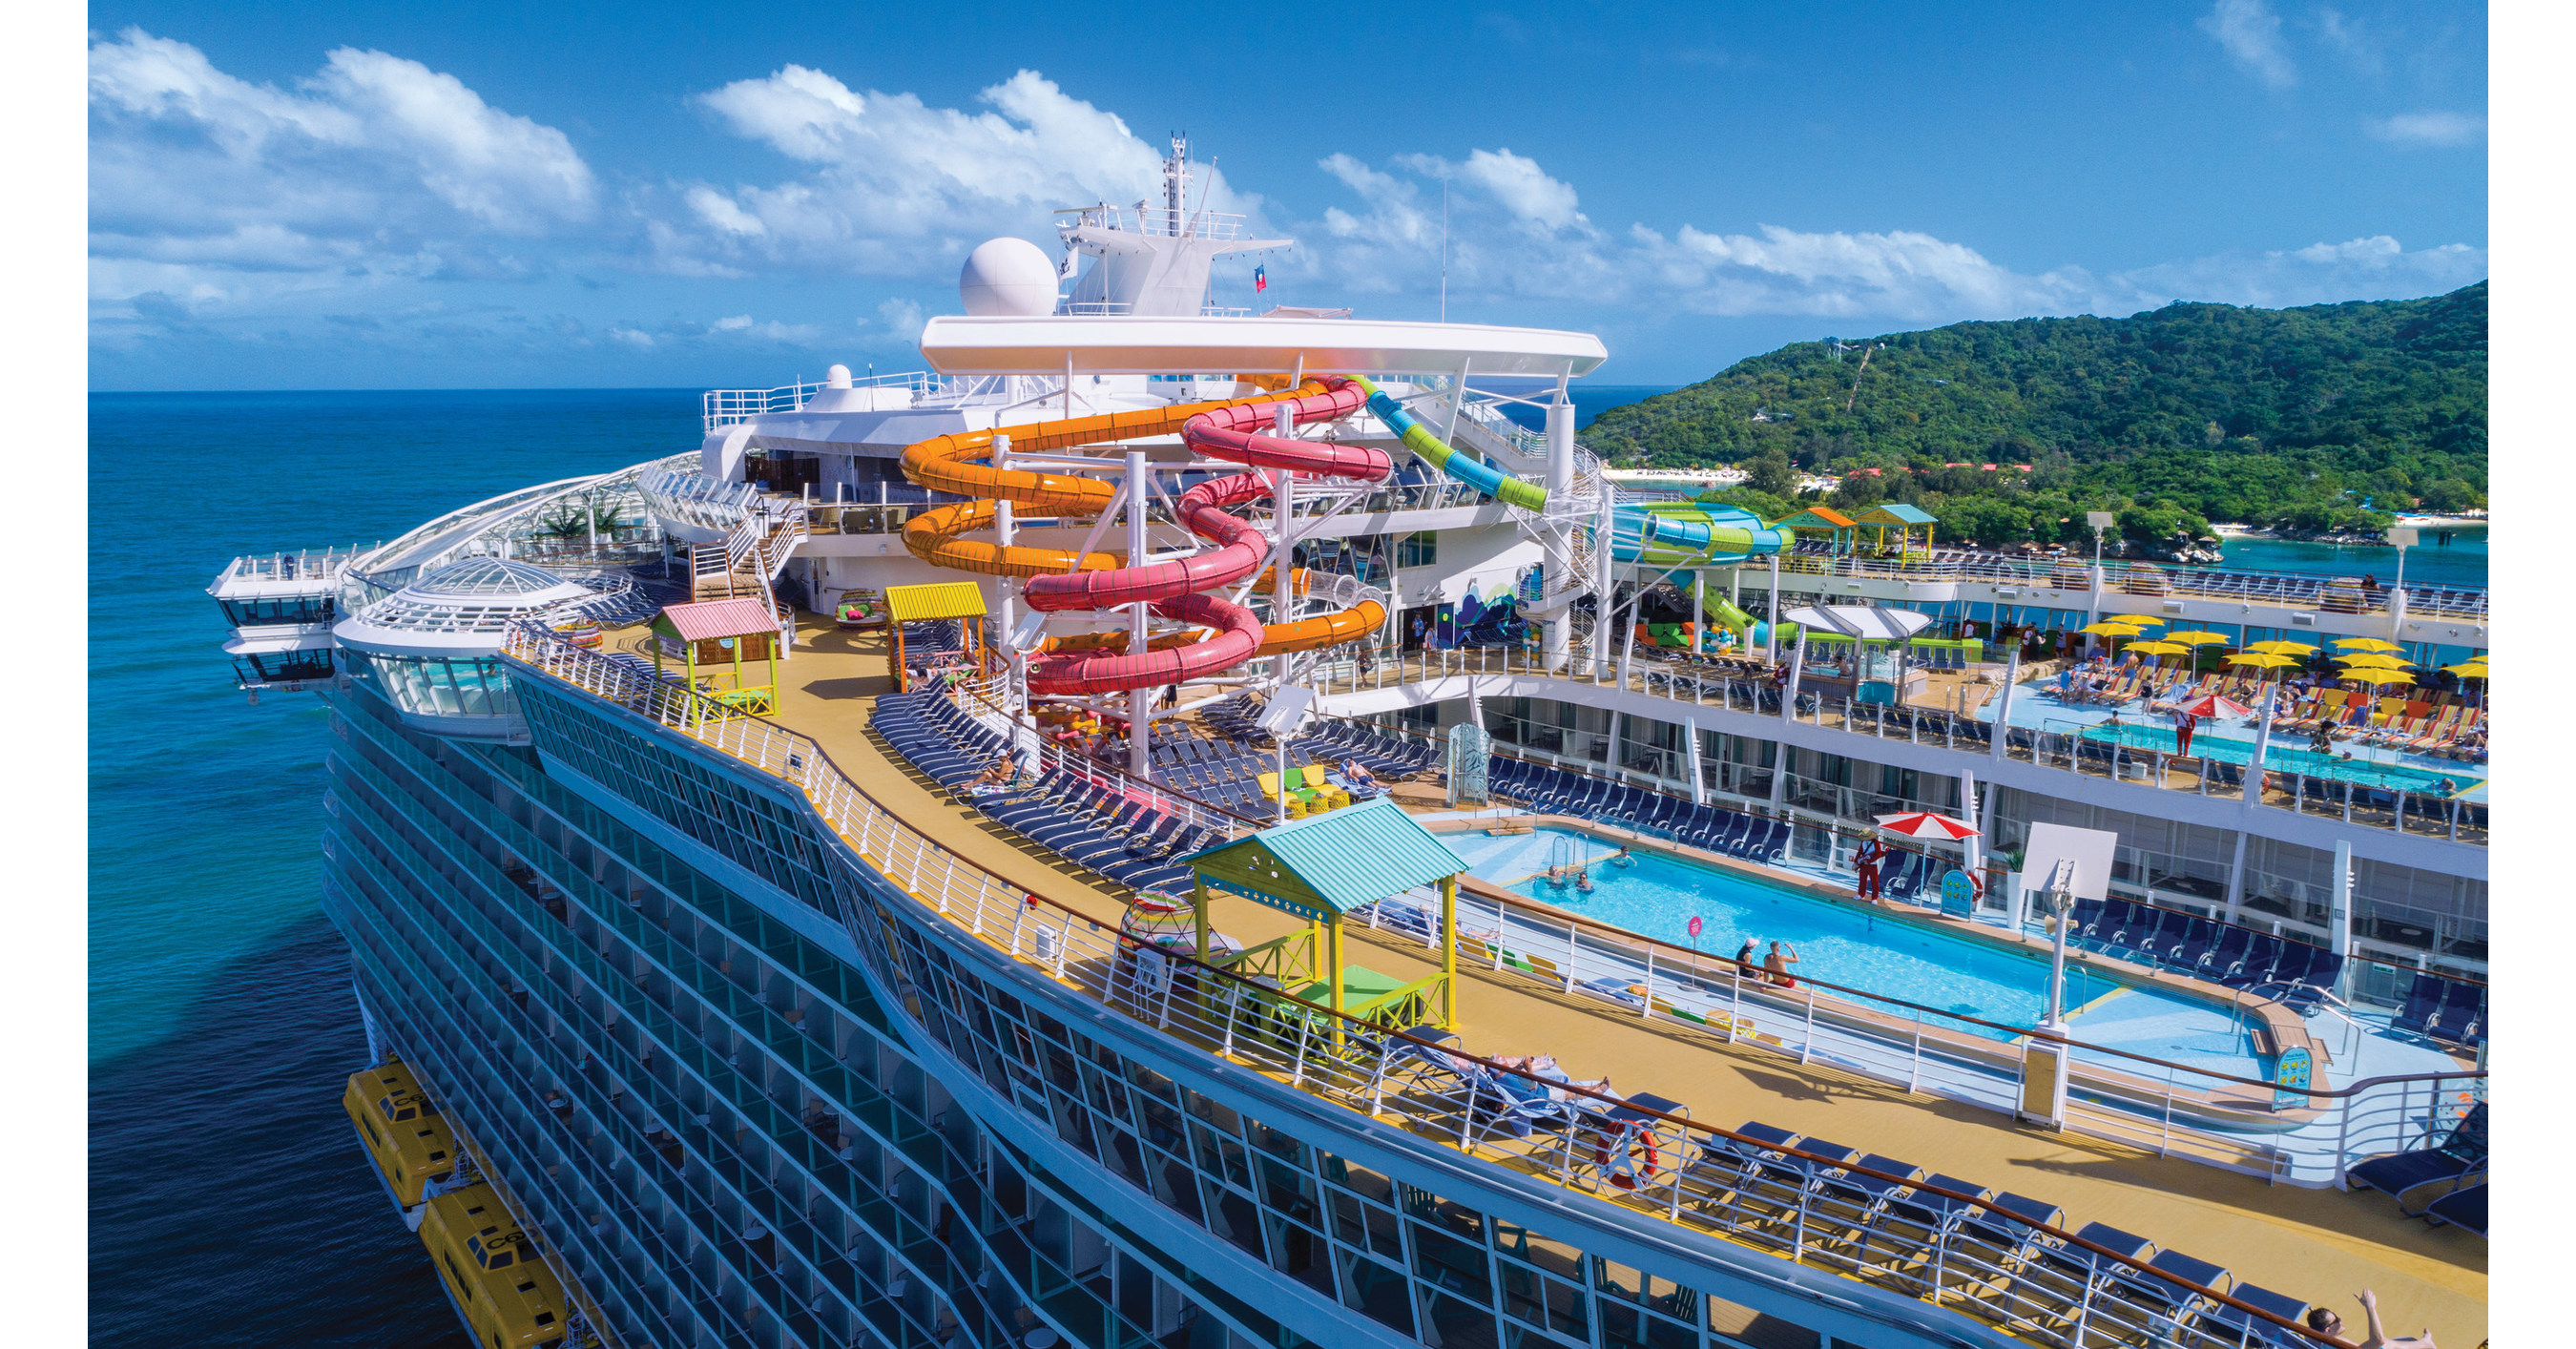 Royal Caribbean Releases Schedule For Remaining Ships Returning To Sailing